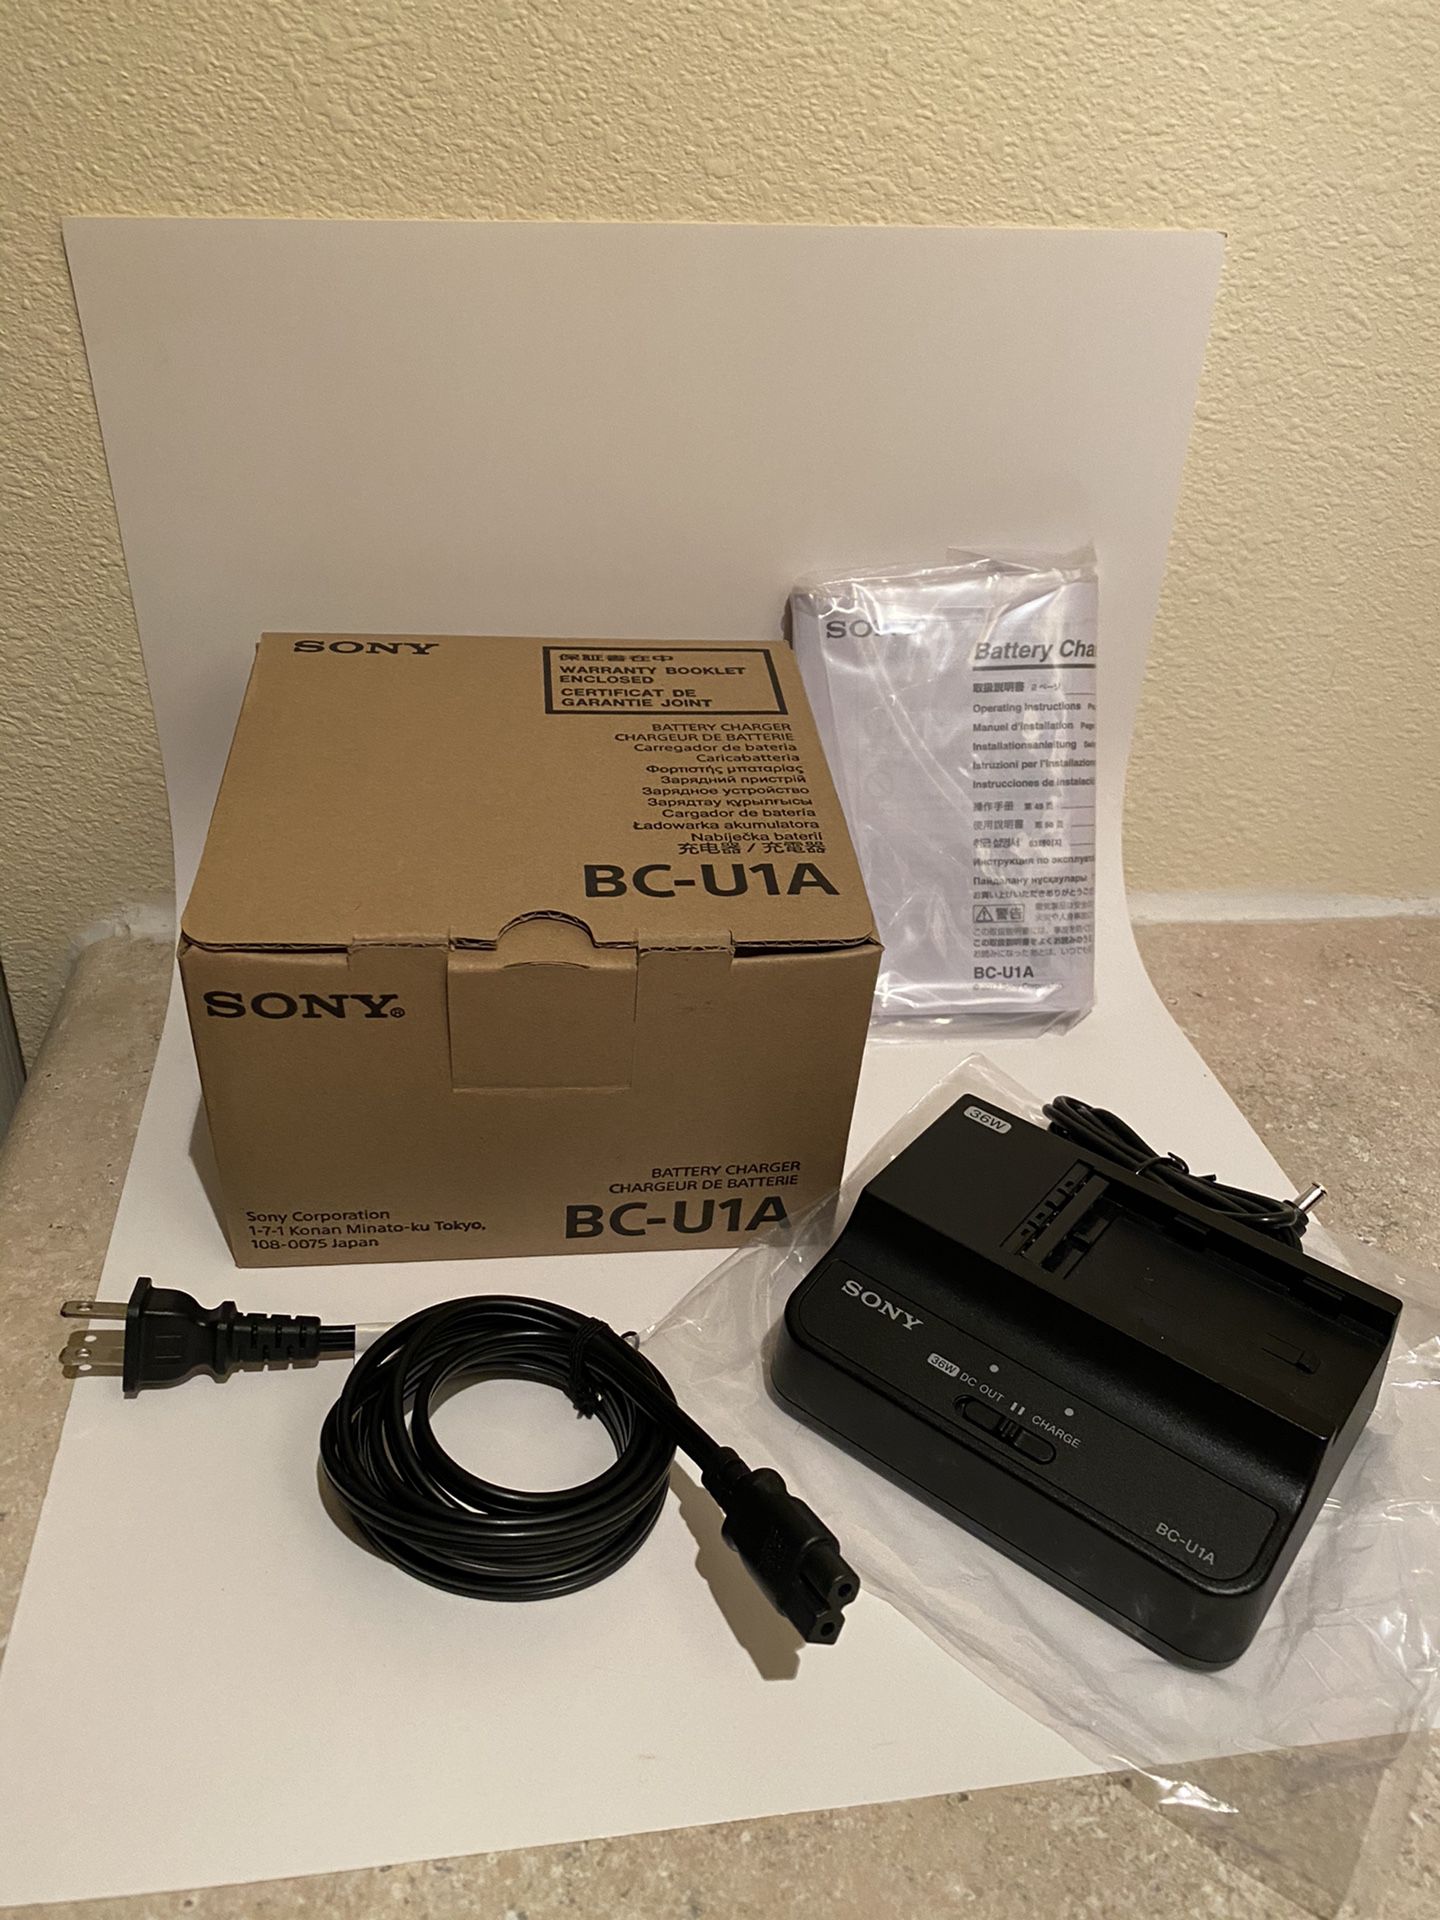 Sony BC - U1A (Battery Charger) - Like New OPEN BOX